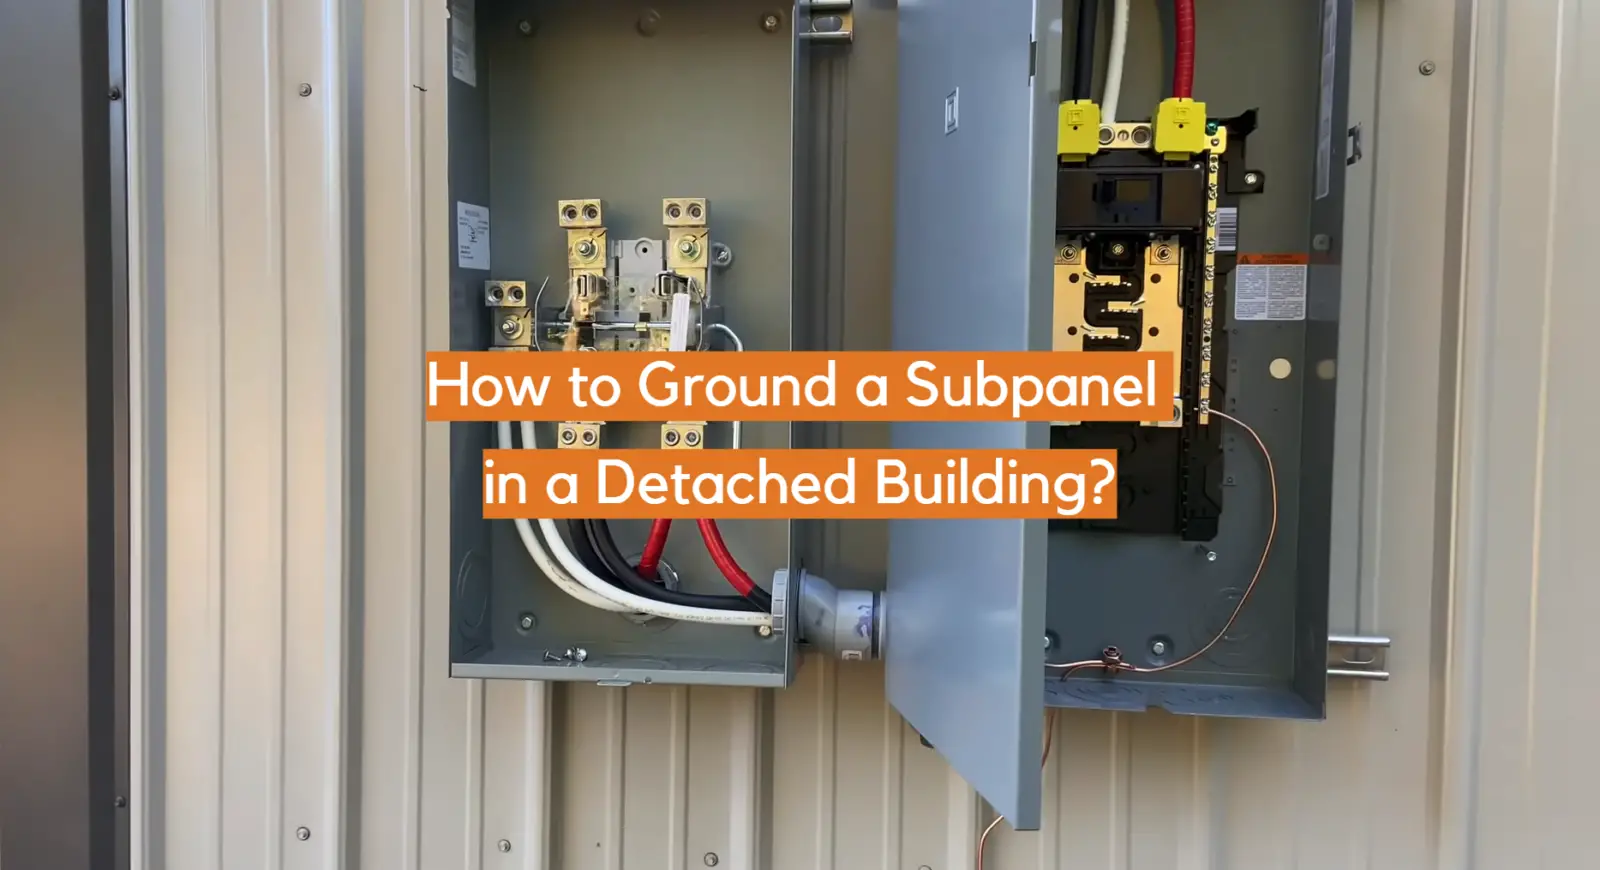 How to Ground a Subpanel in a Detached Building?